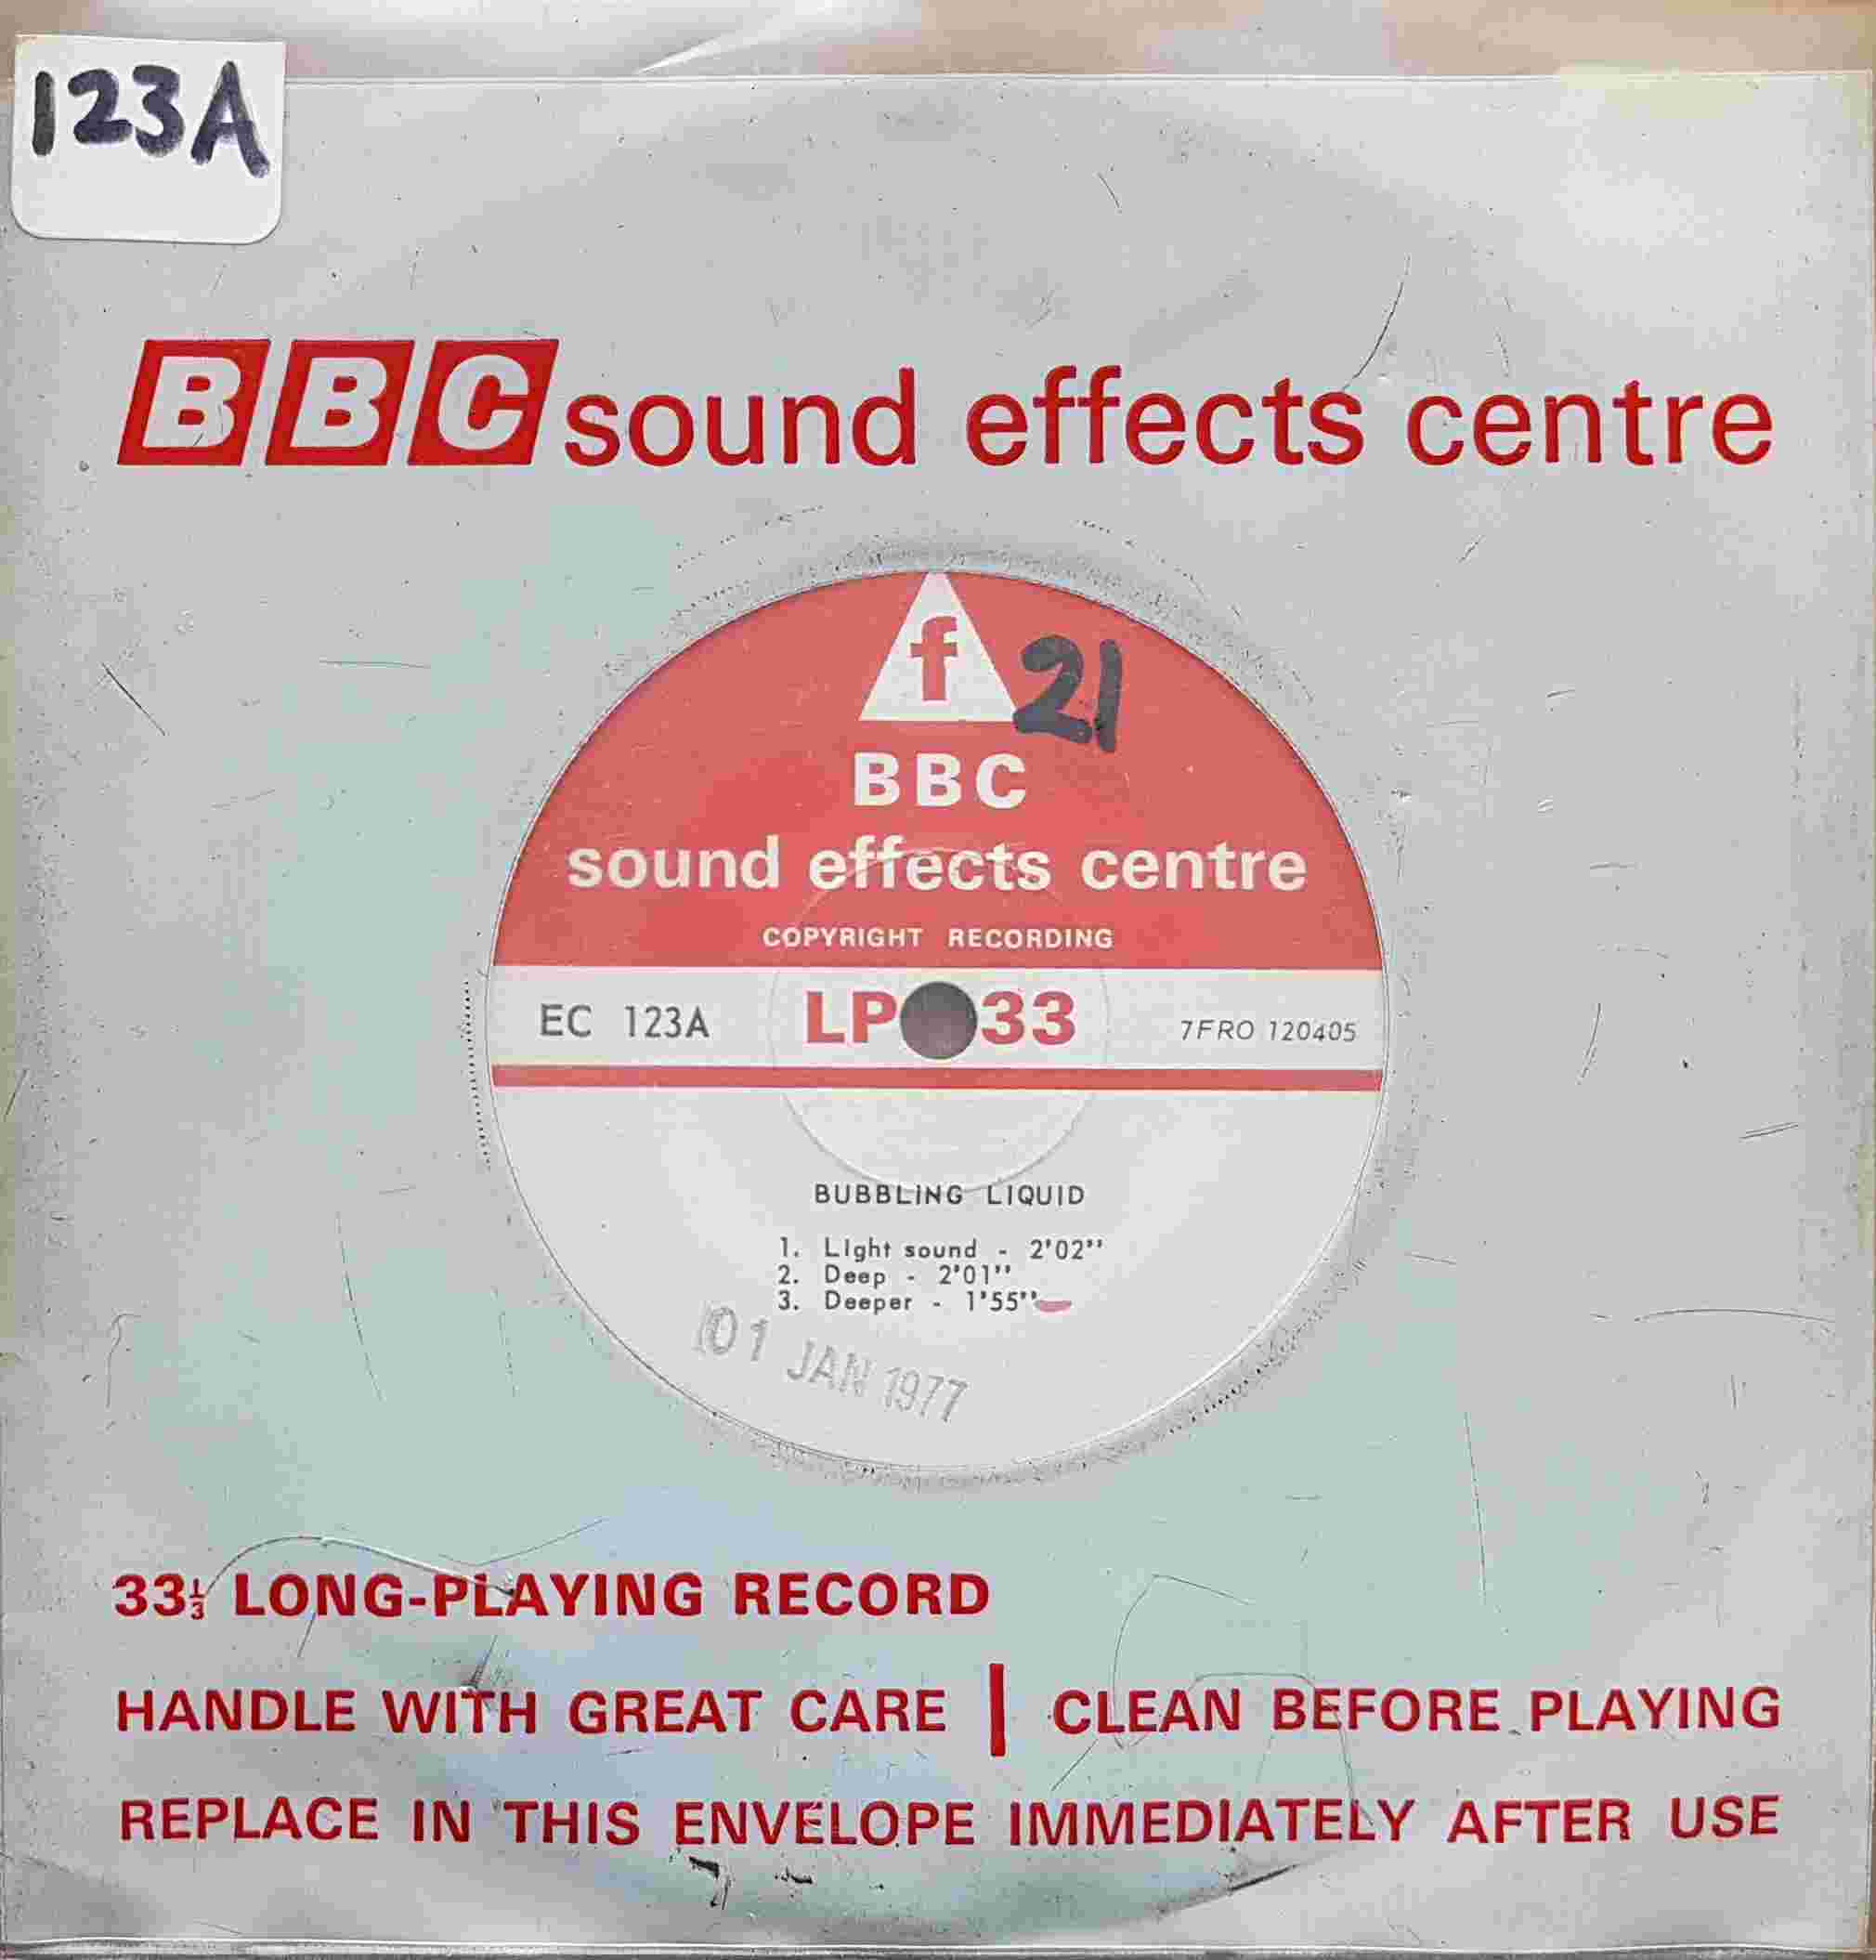 Picture of EC 123A Bubbling liquid by artist Not registered from the BBC records and Tapes library